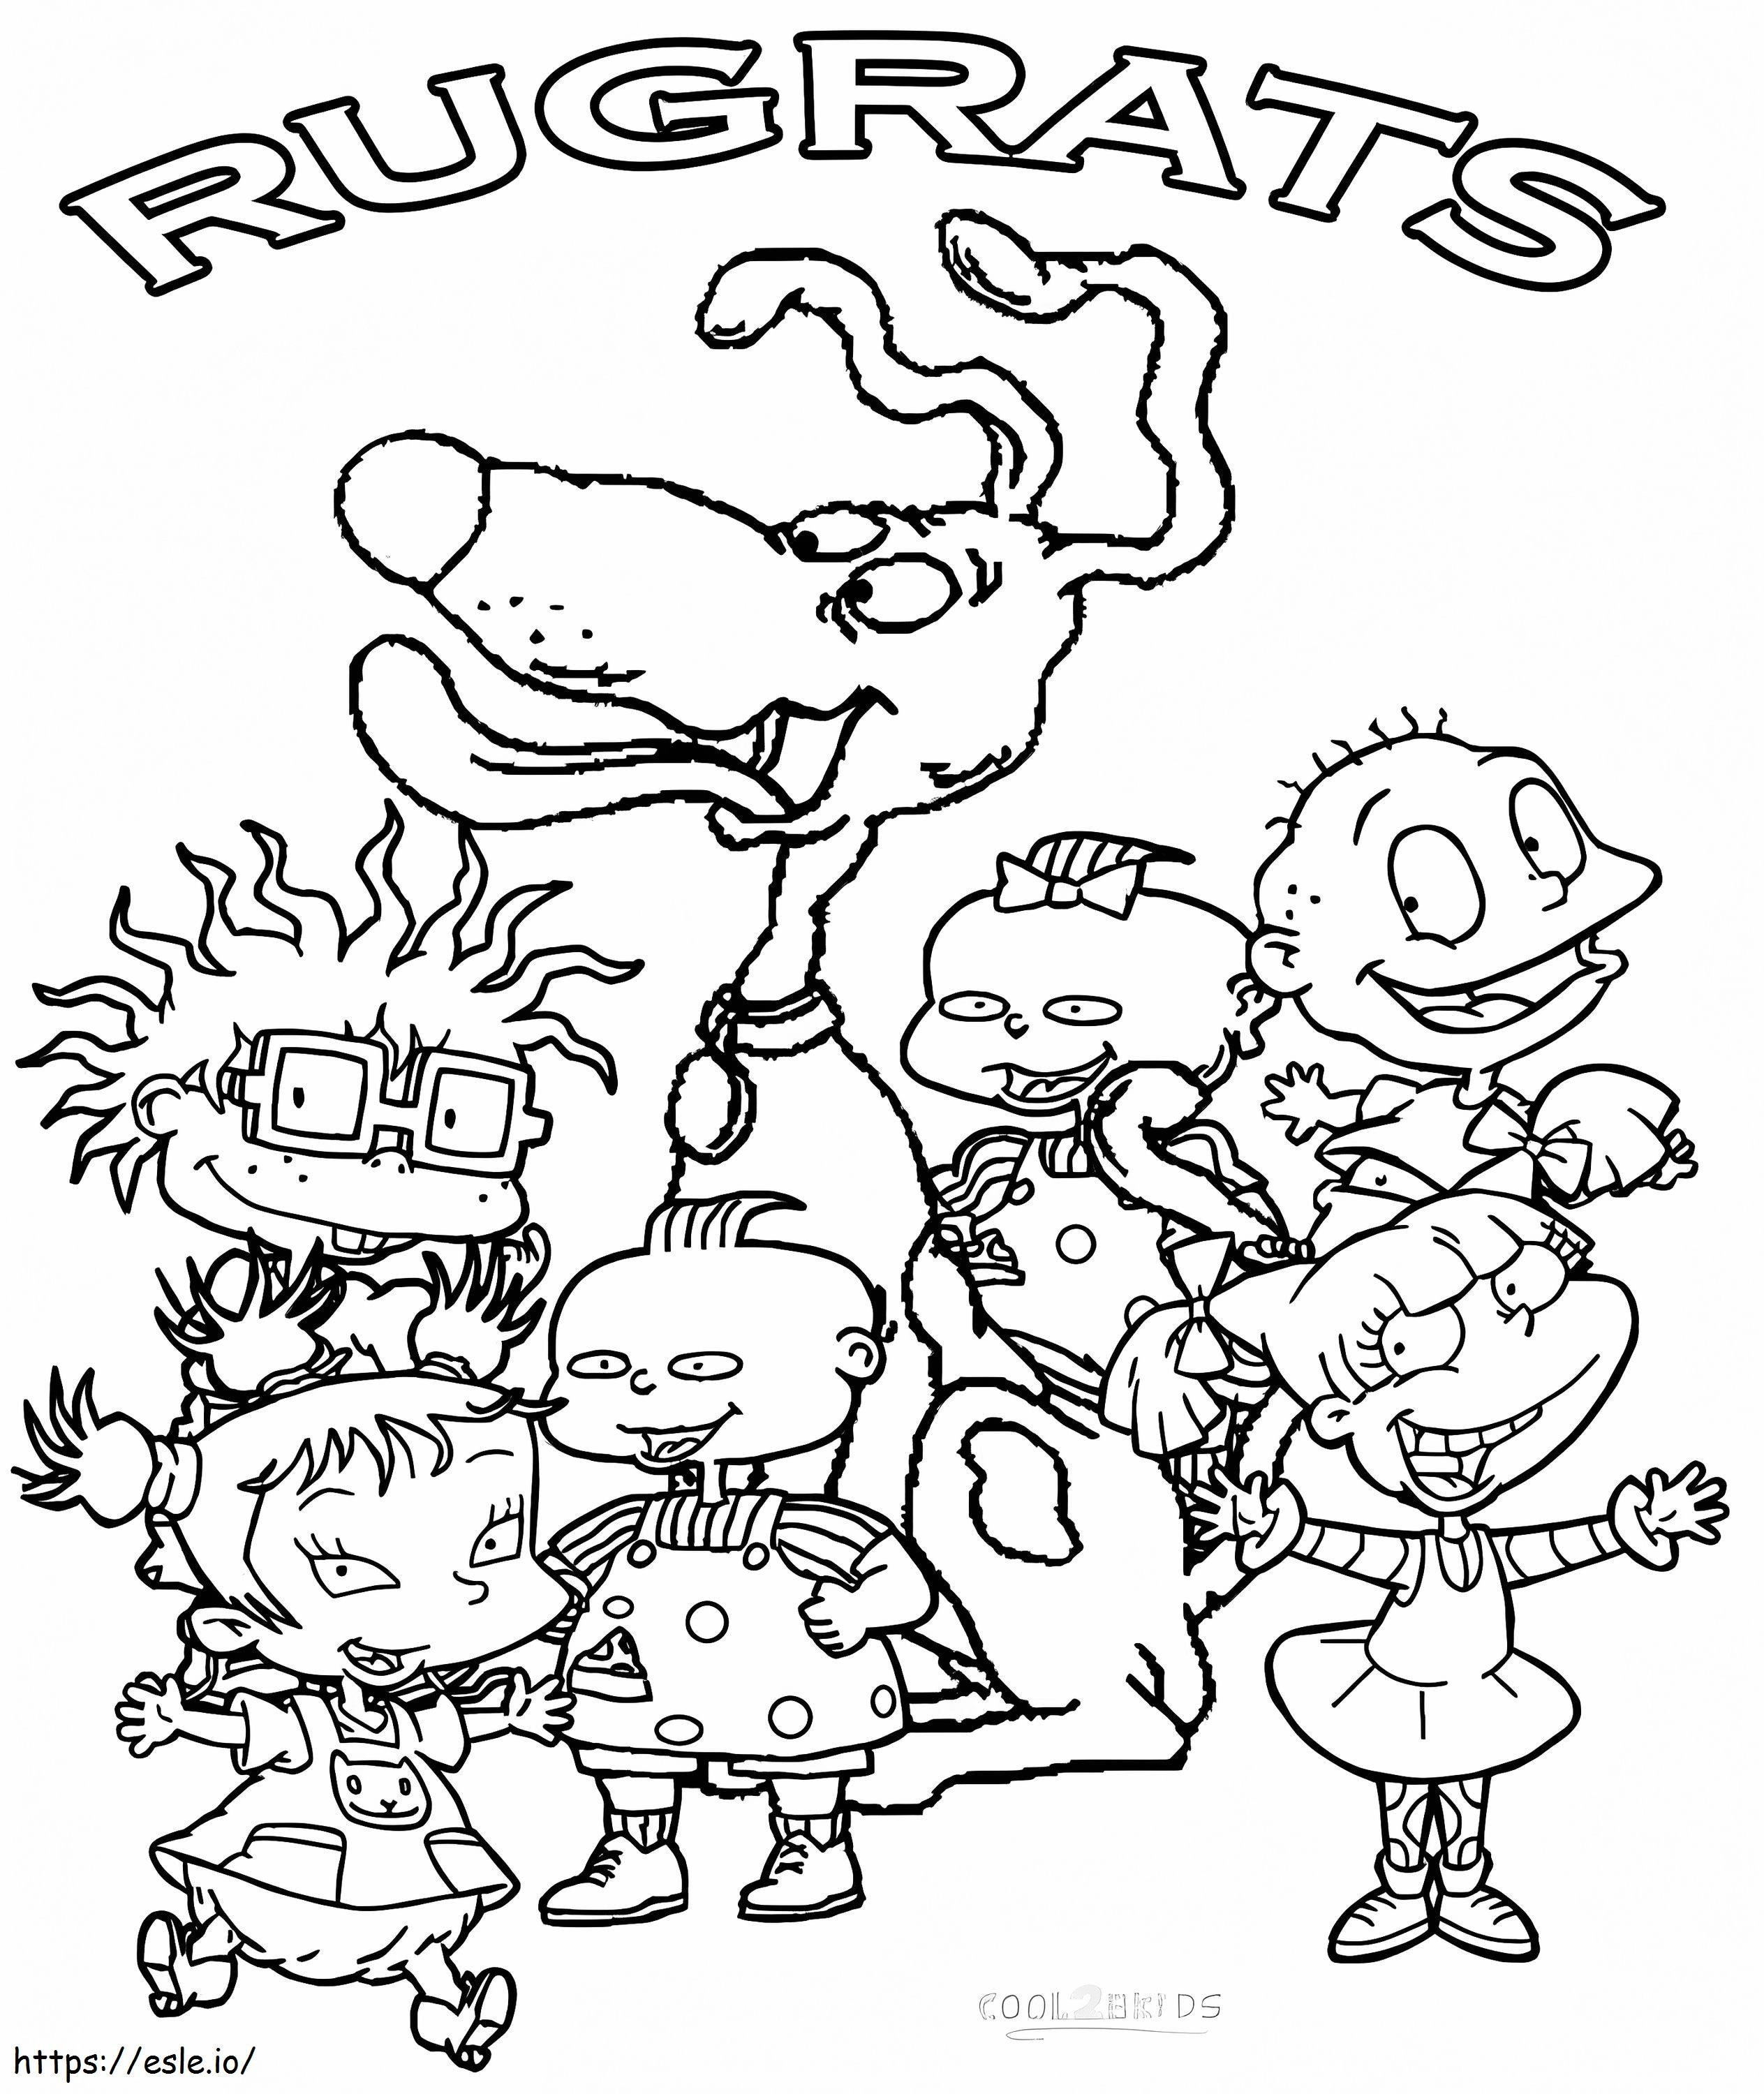 Rugrats Characters coloring page